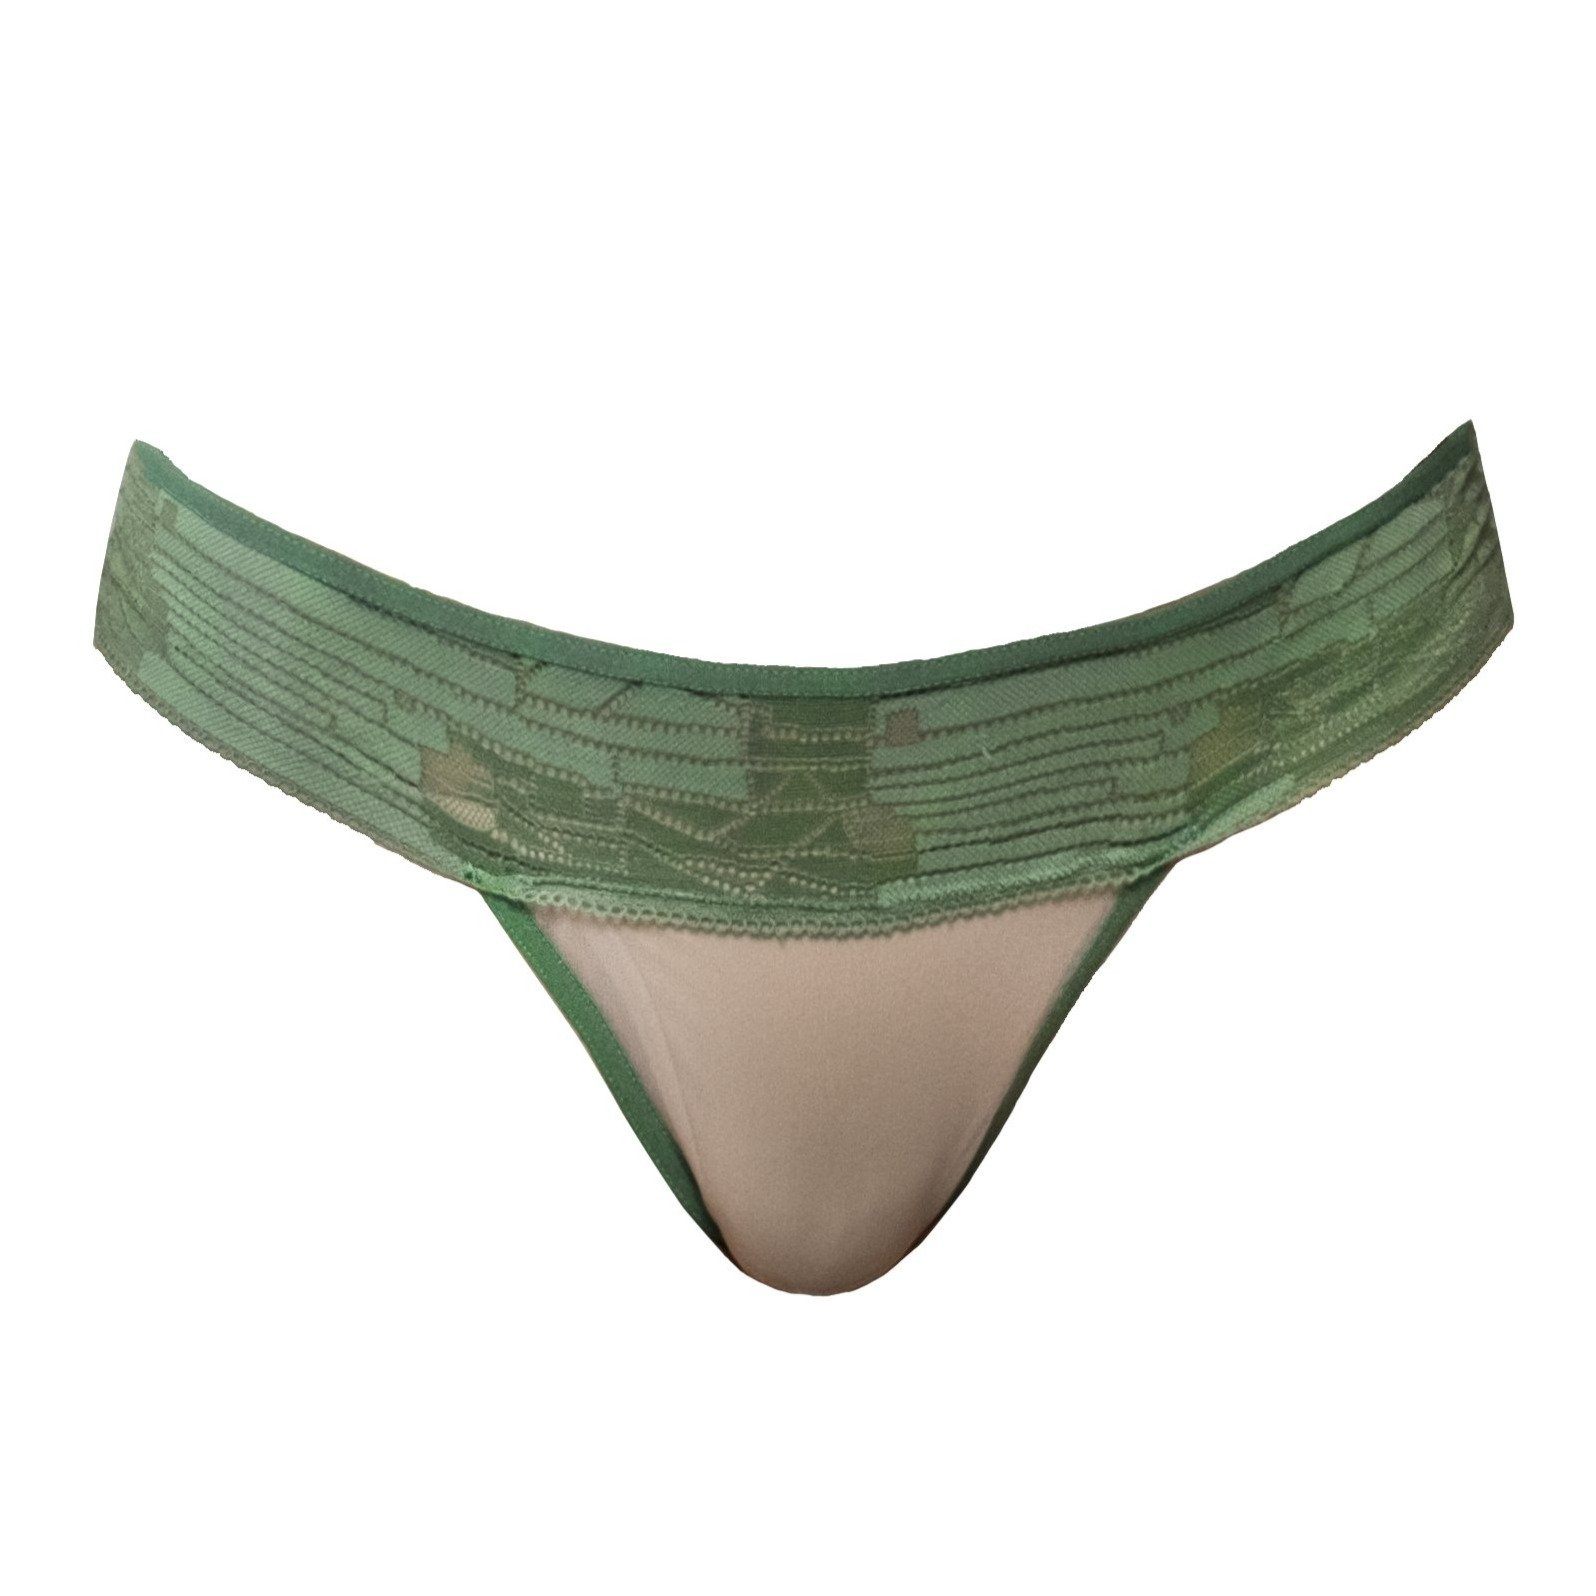 Delicate sexy thong | green and nude - Carol Coelho Cleopatra